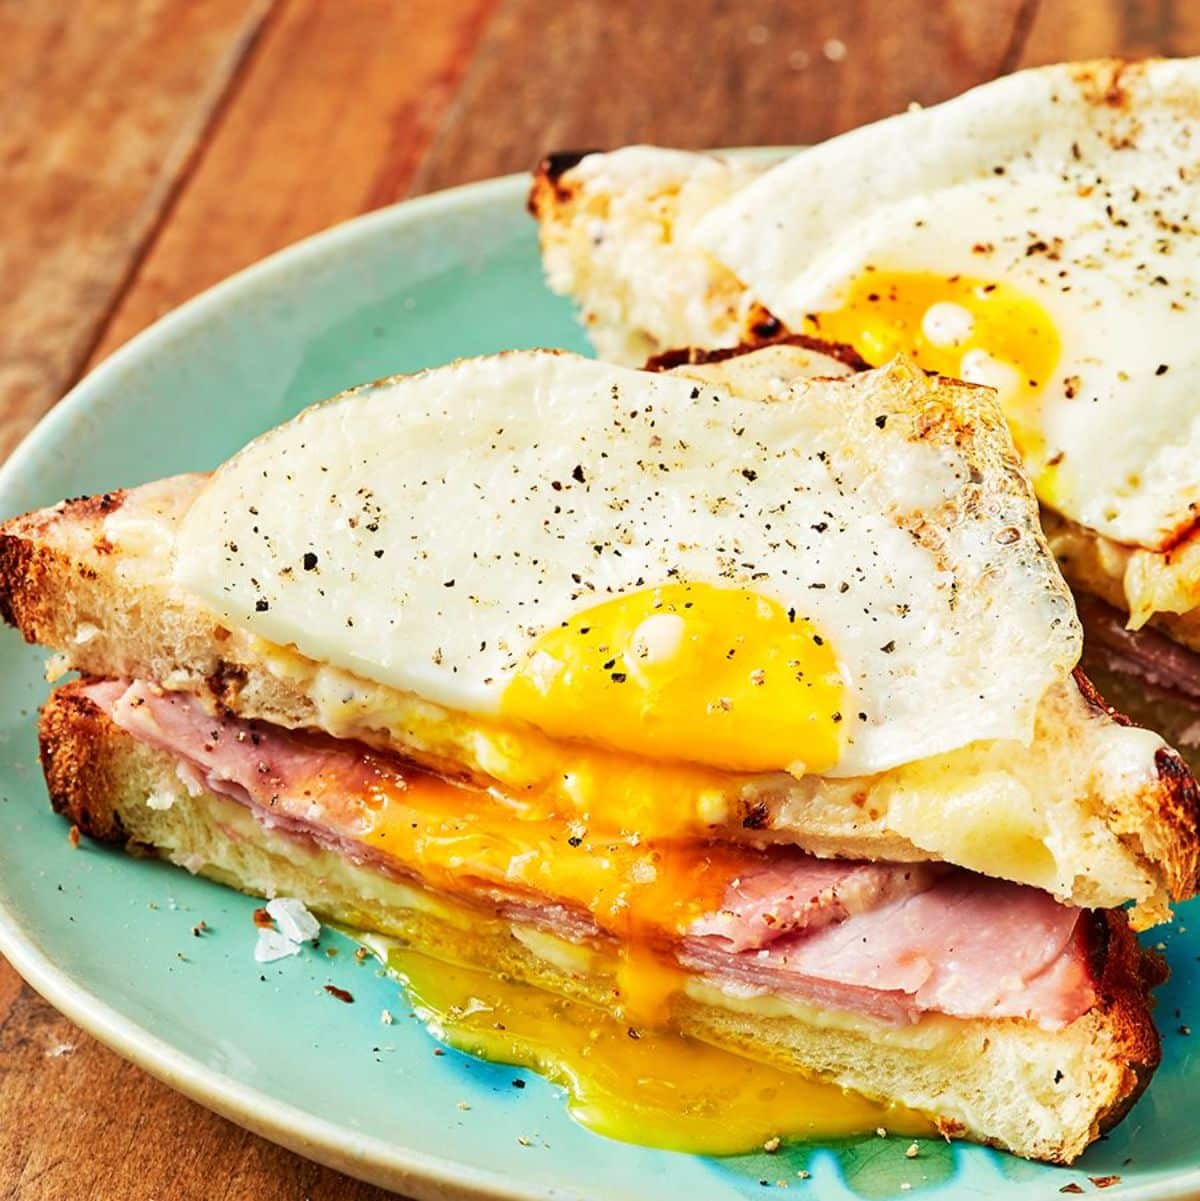 Juicy croque madame sandwiches on a blue plate.